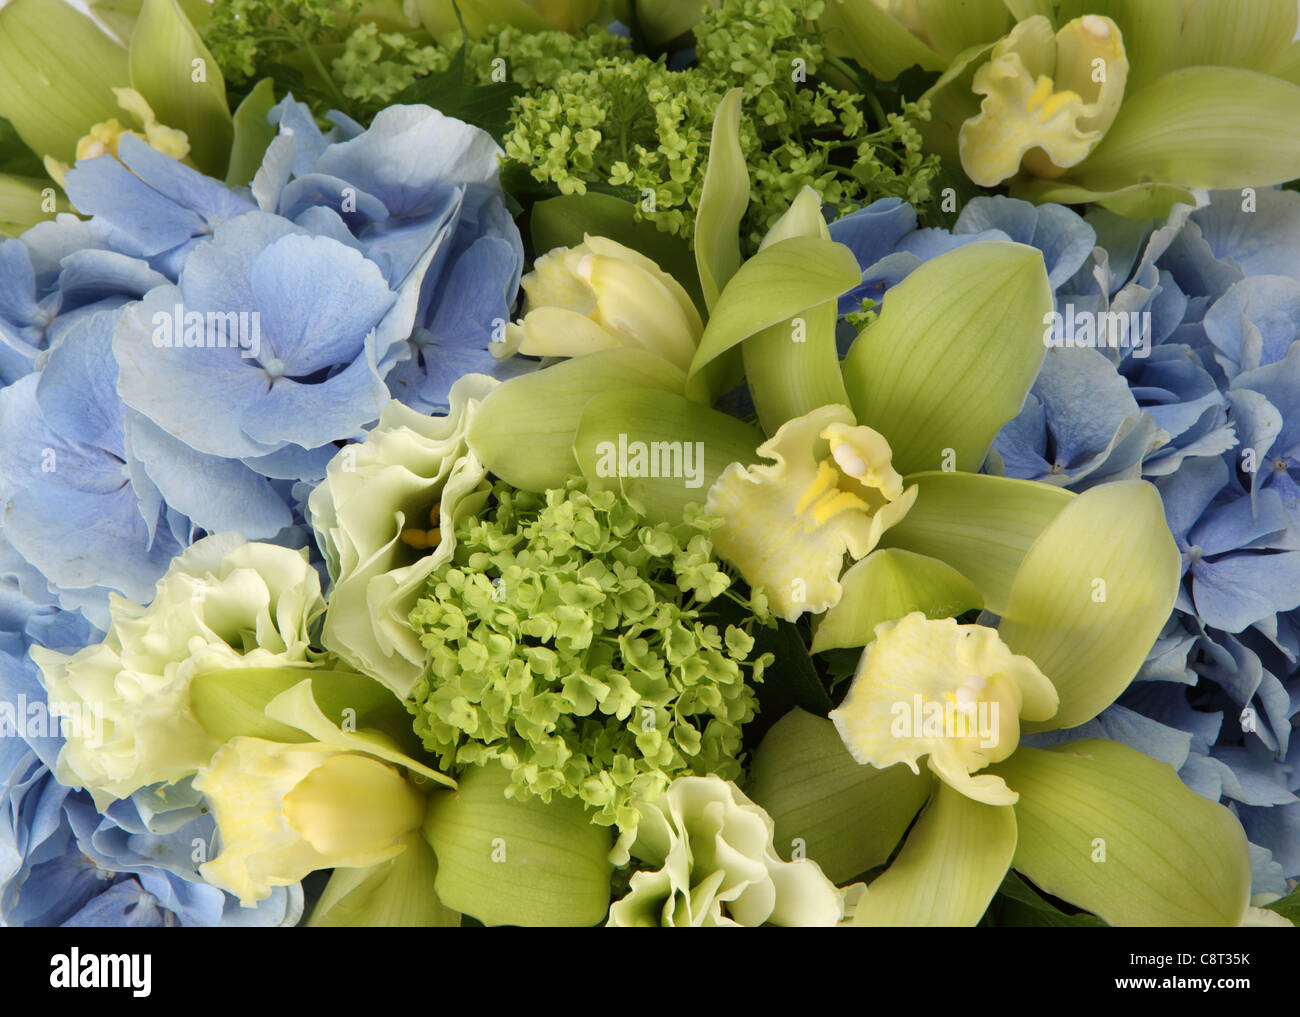 A close-up of a colorful bouquet of flowers. A blue hydrangea, small green hydrangeas and pale green cymbidium orchids. Stock Photo